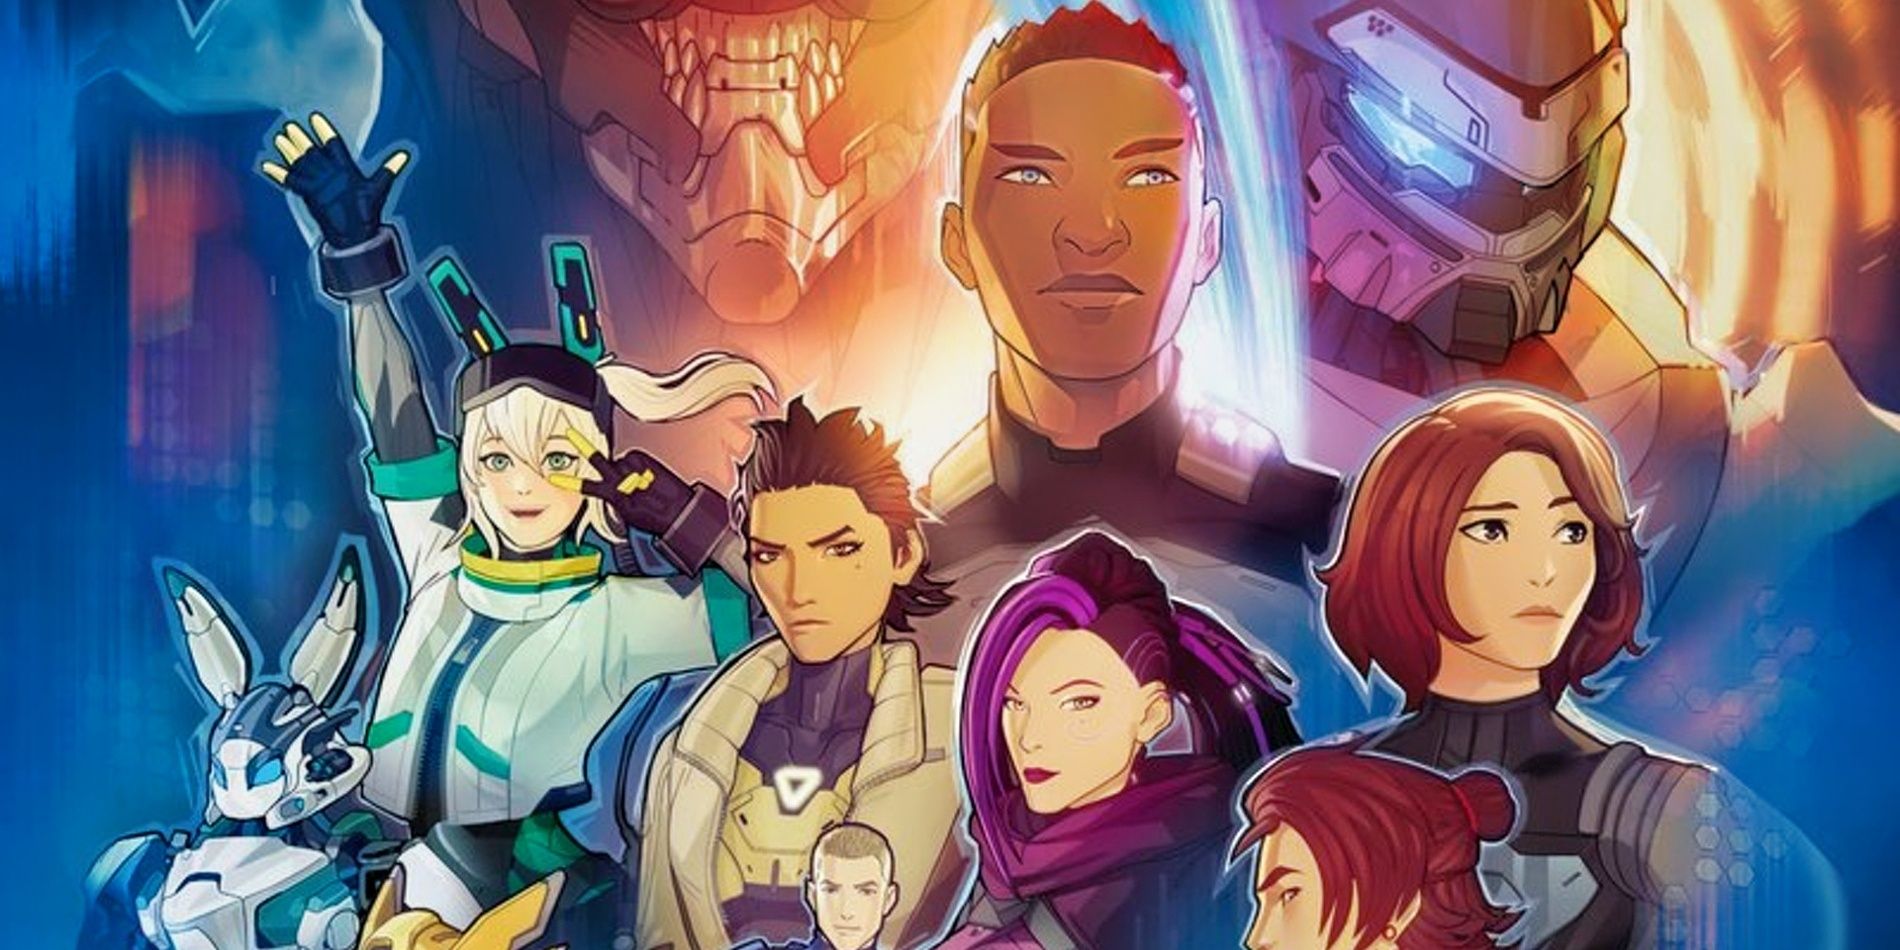 The characters of Gen:Lock on a promotional image